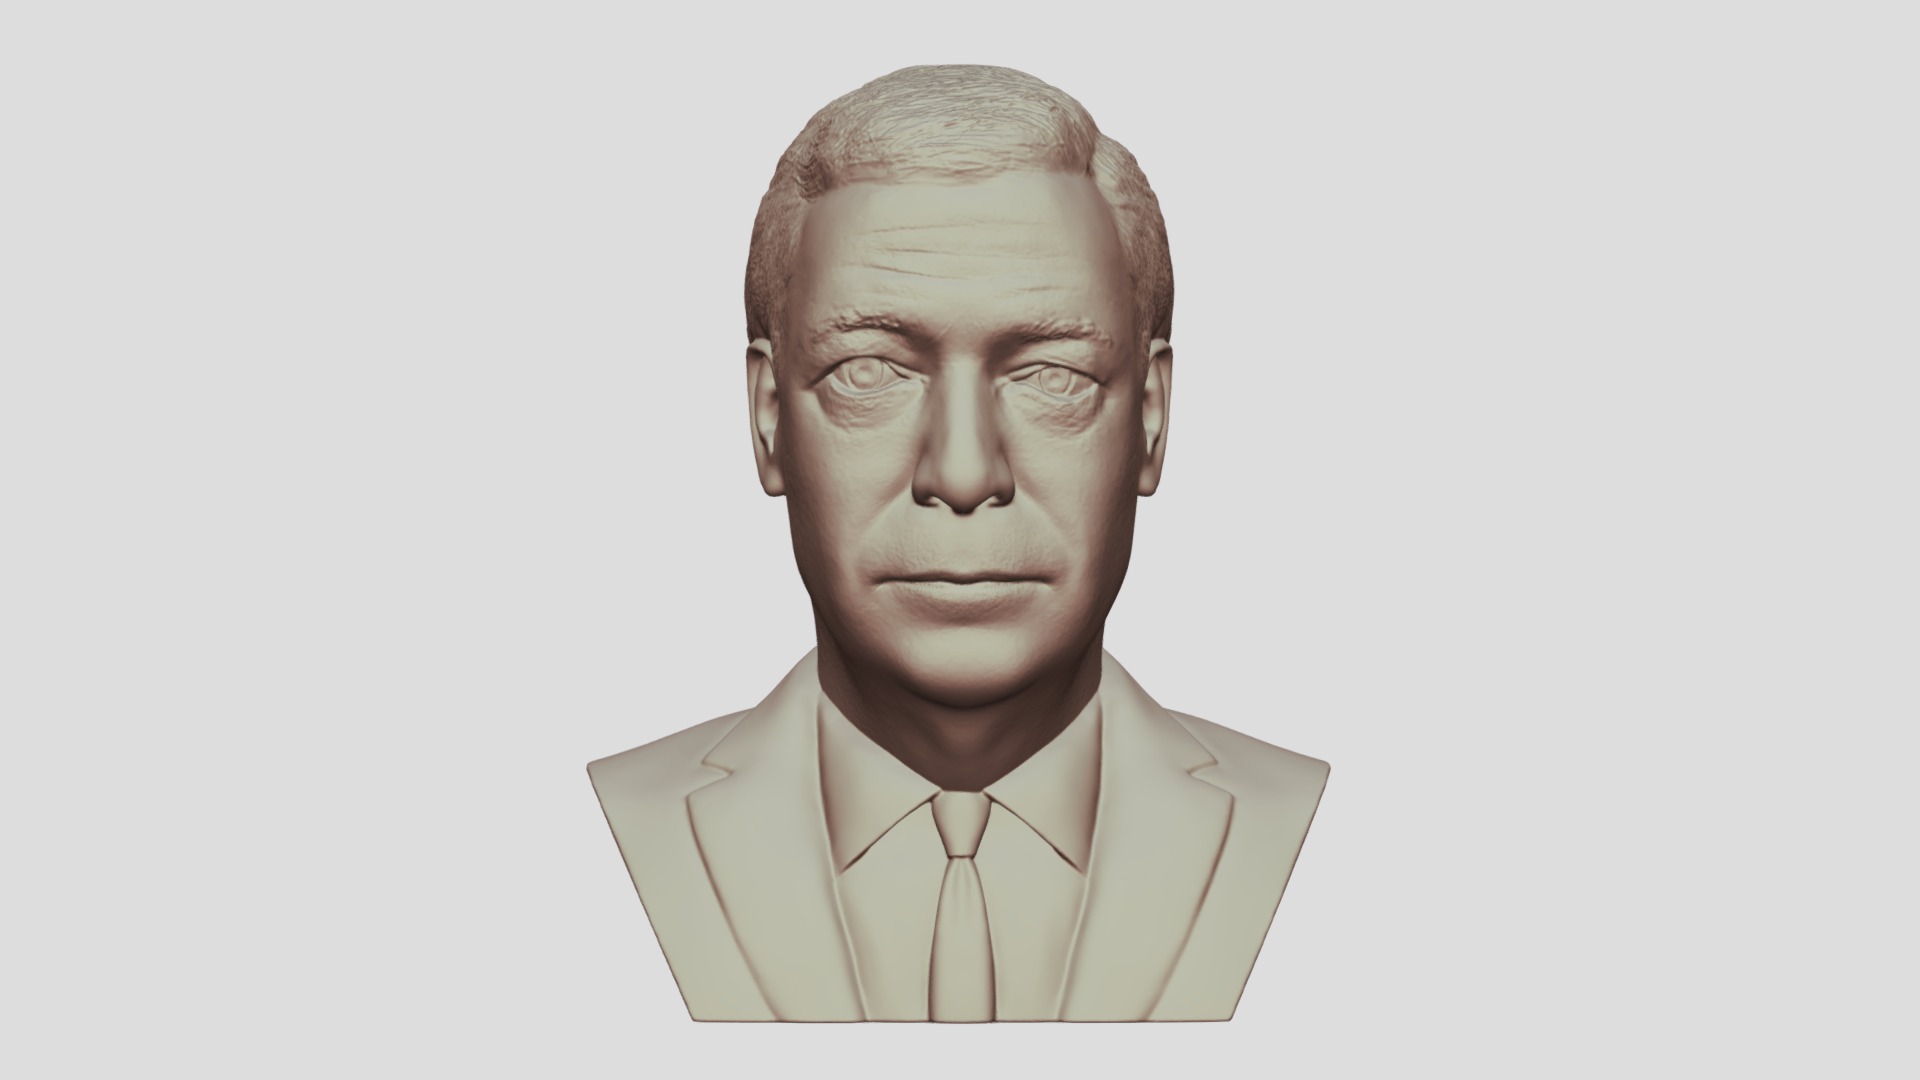 3D model Nigel Farage bust for 3D printing - This is a 3D model of the Nigel Farage bust for 3D printing. The 3D model is about a man with a straight face.